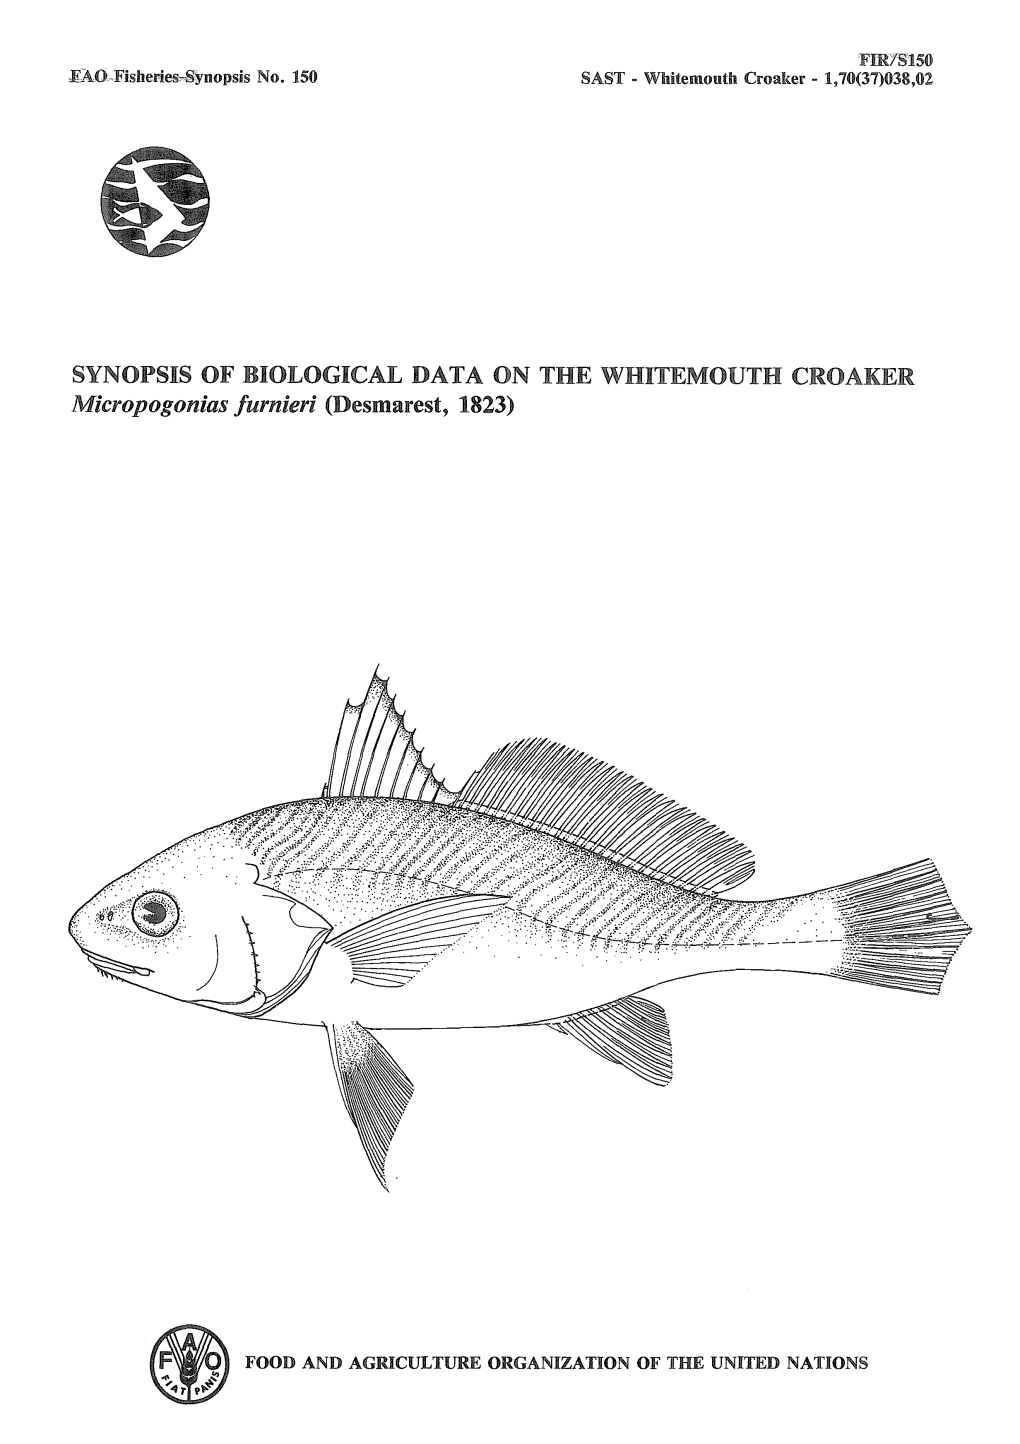 SYNOPSIS of BIOLOGICAL DATA on the WHITEMOUTH CROAKER Micropogonias Furnieri (Desmarest, 1823)